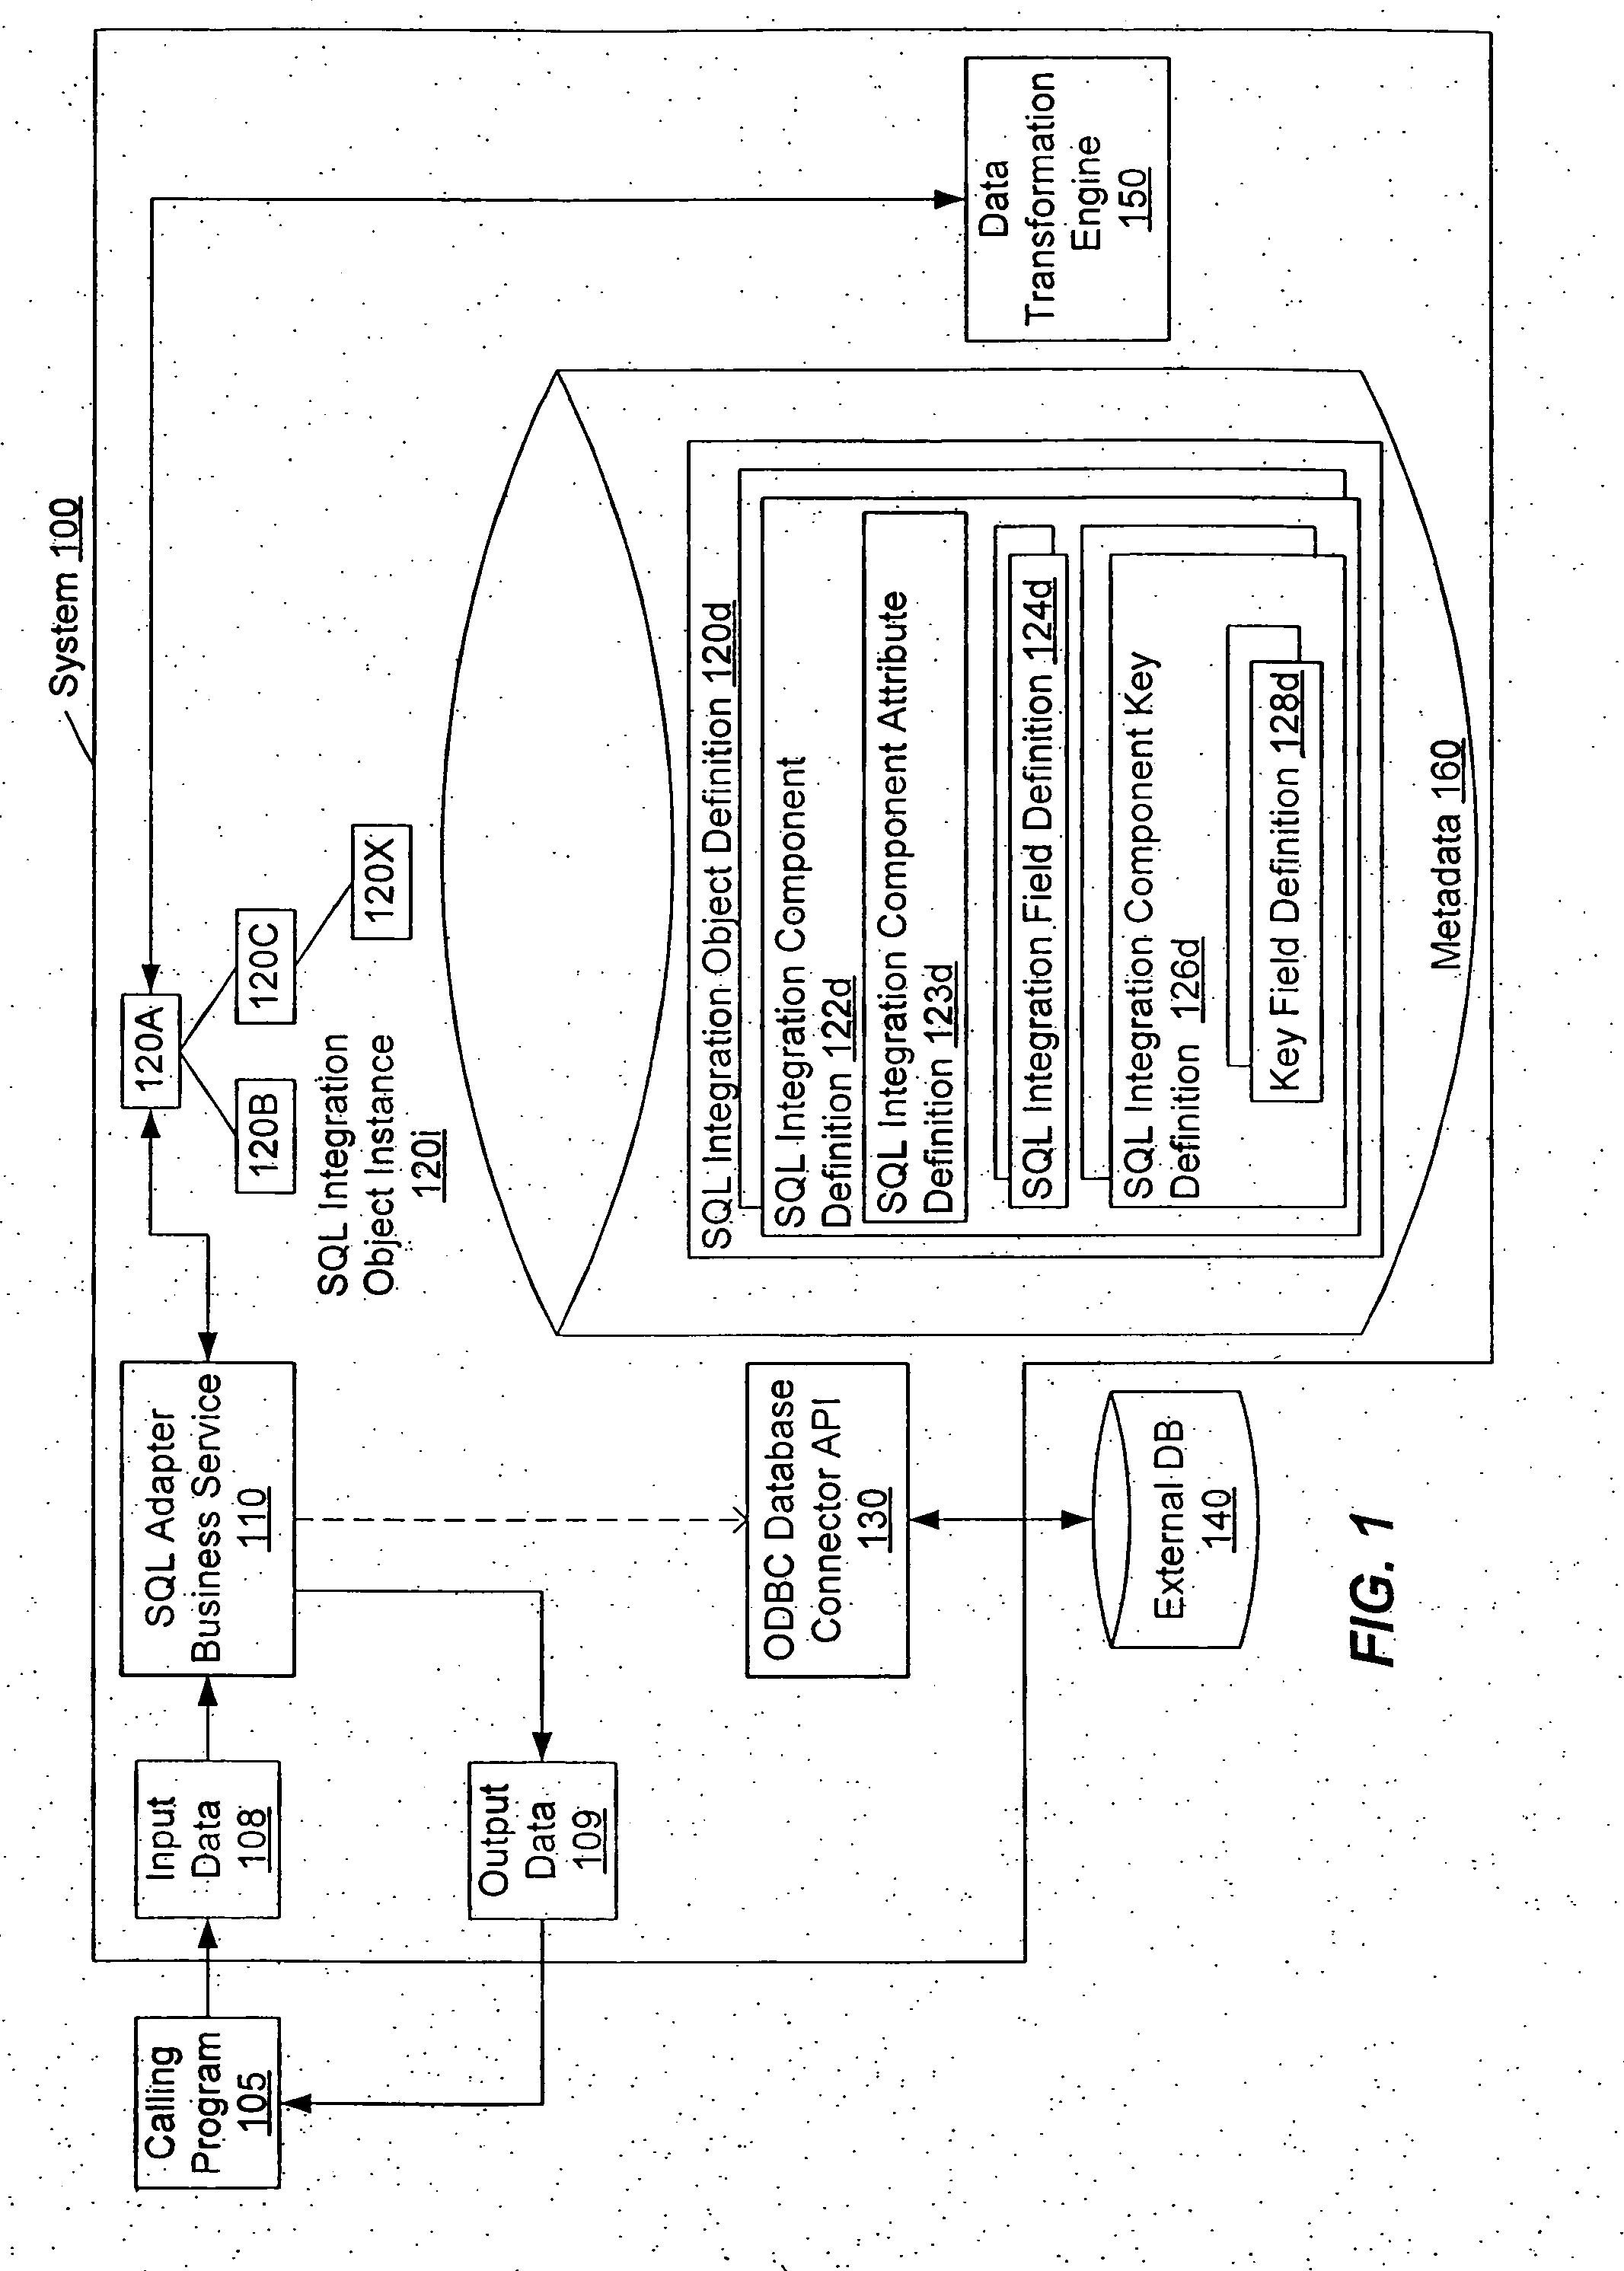 Method and System for an Operation Capable of Updating and Inserting Information in a Database